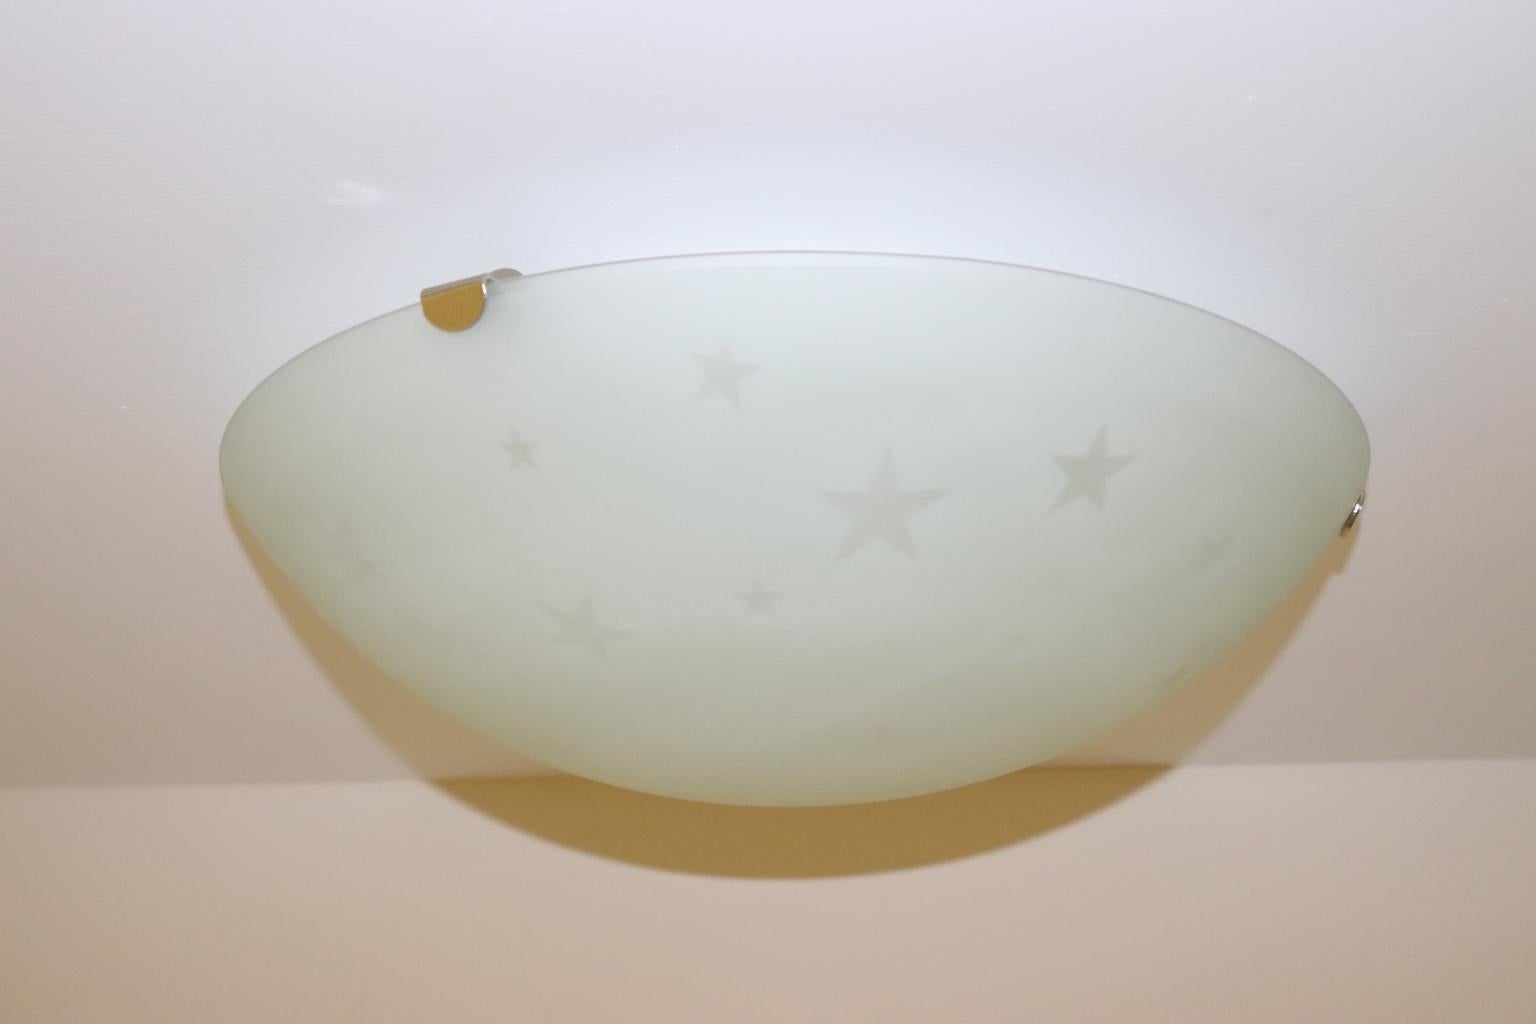 Vintage Italian ceiling lamp Murano crystal satin glass with stars details.
Designed by Carlo Nason and manufactured by Murano Due.
Mounting: White lacquered metal with brushed nickel details.
Dimensions: Diameter 17.50